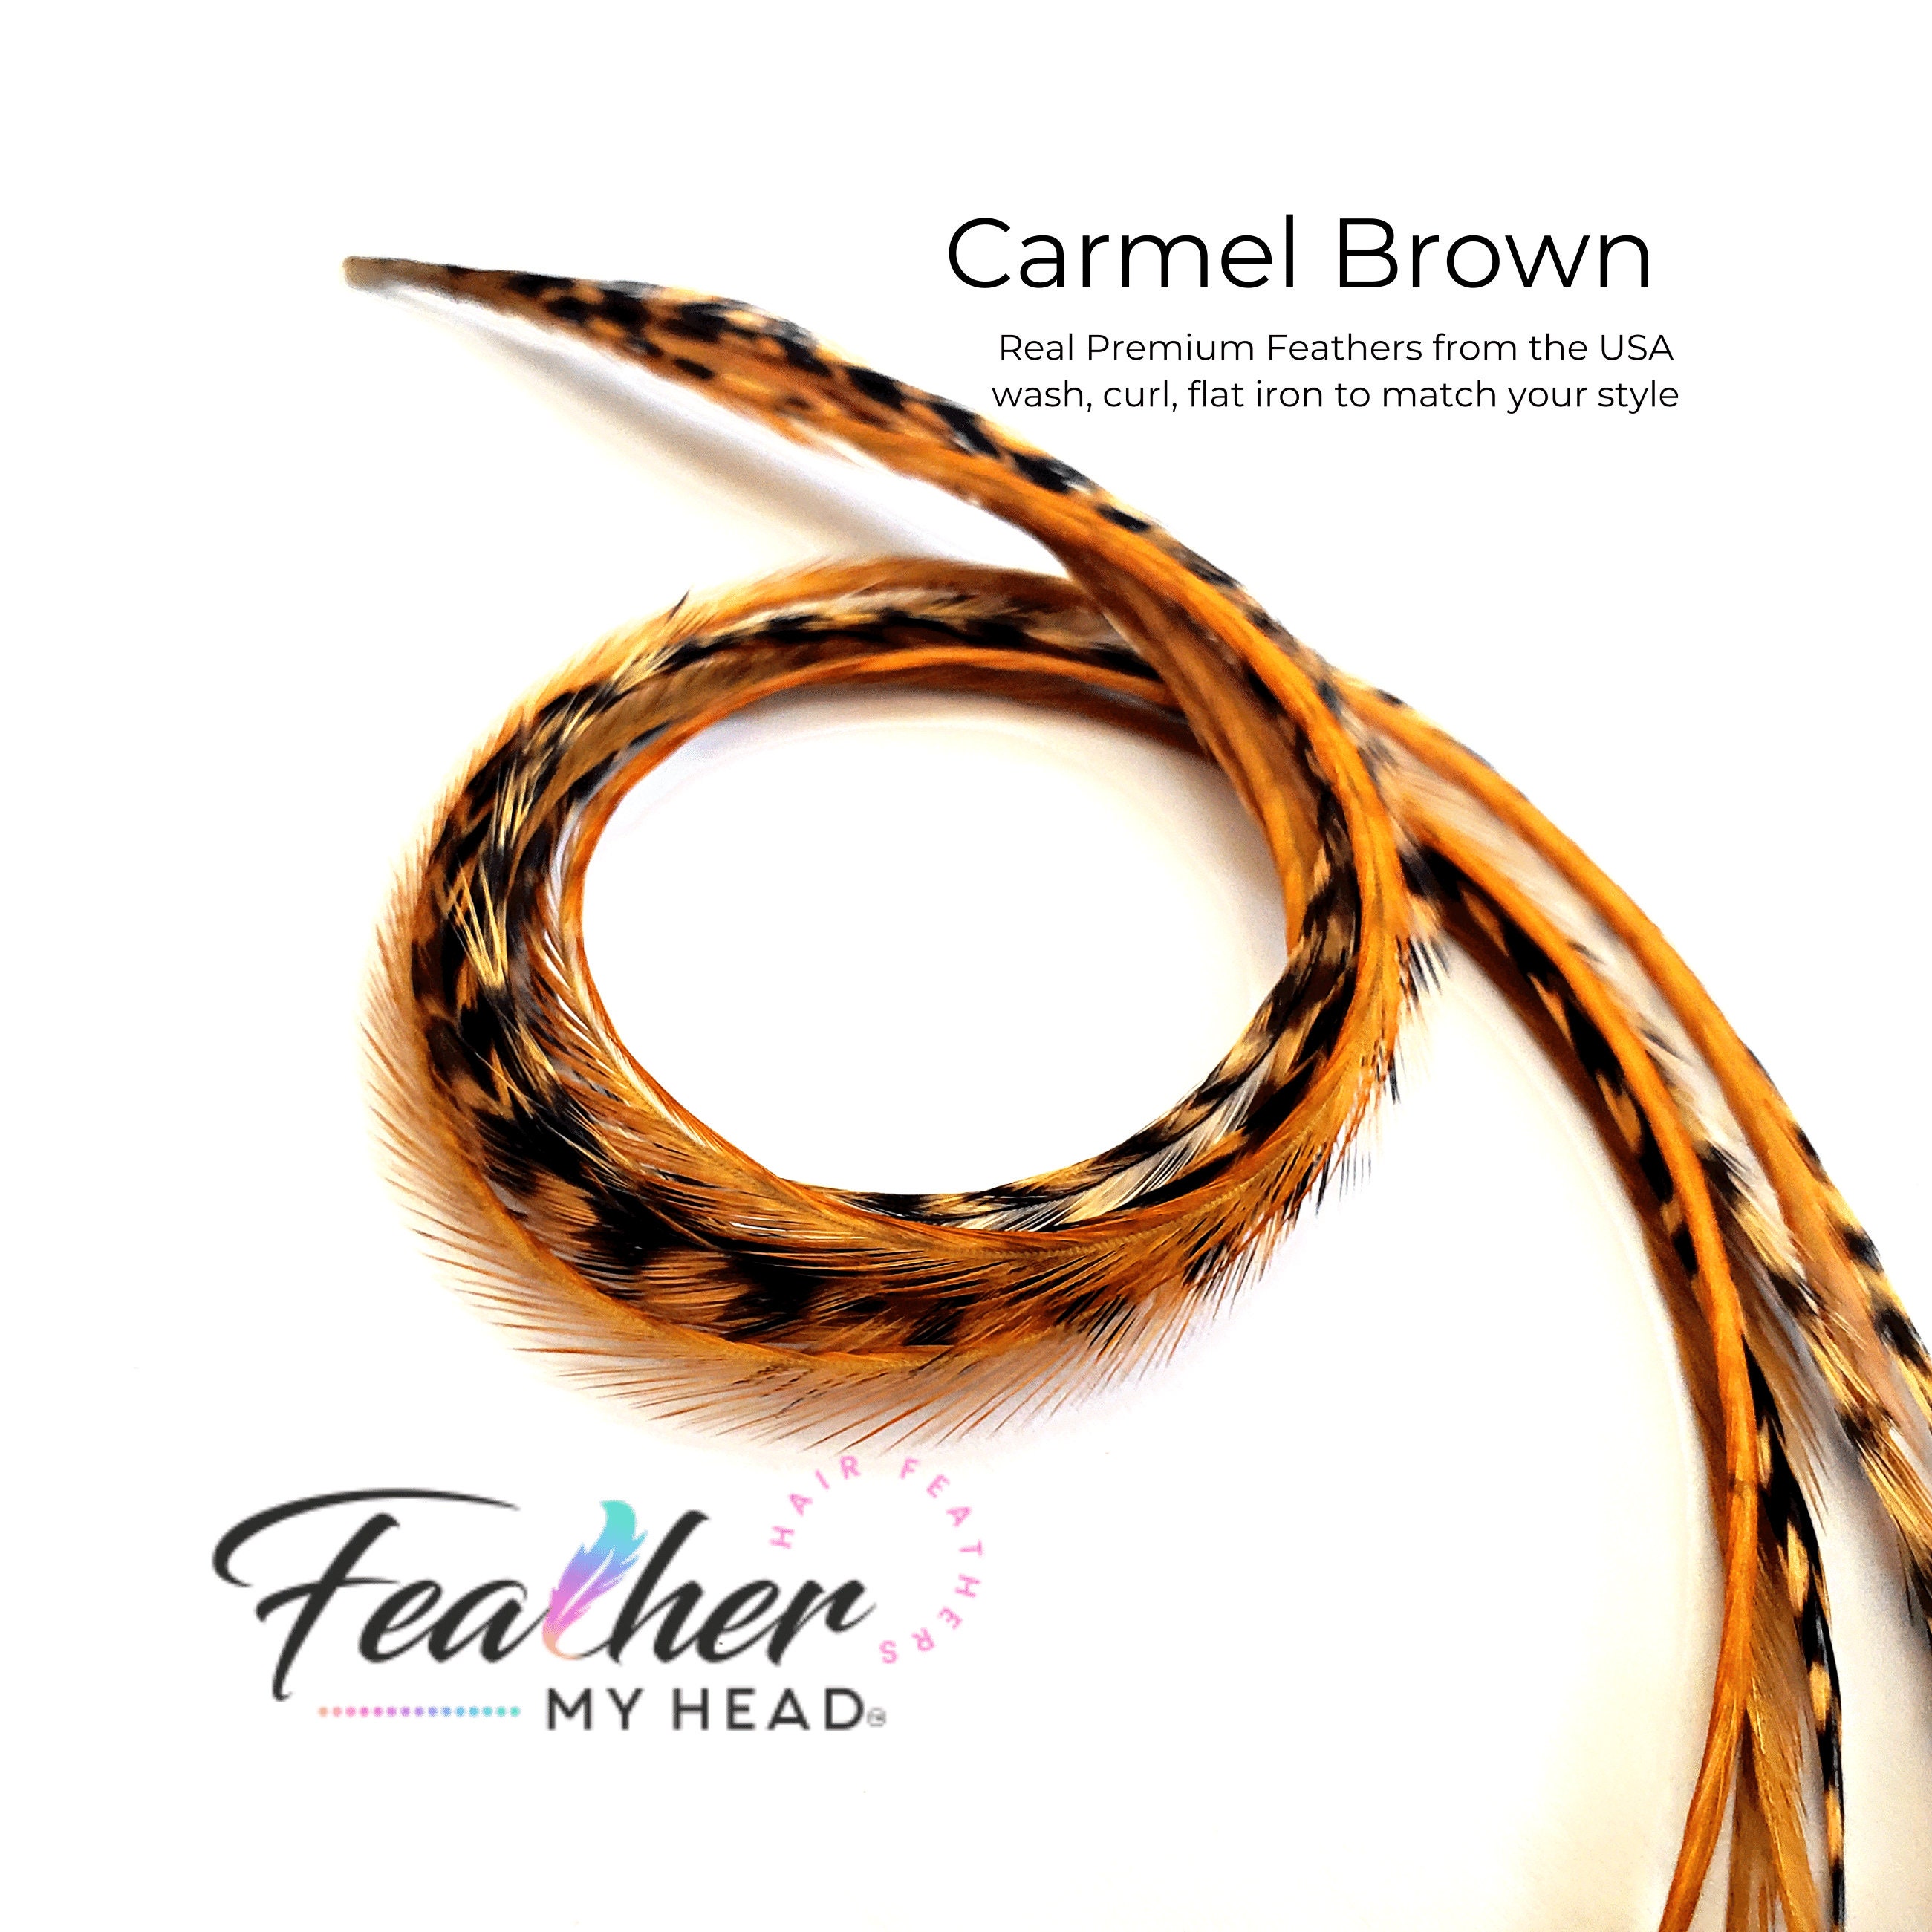 Hair Feather Extensions 6 Premium Hair Feathers Pick Your 